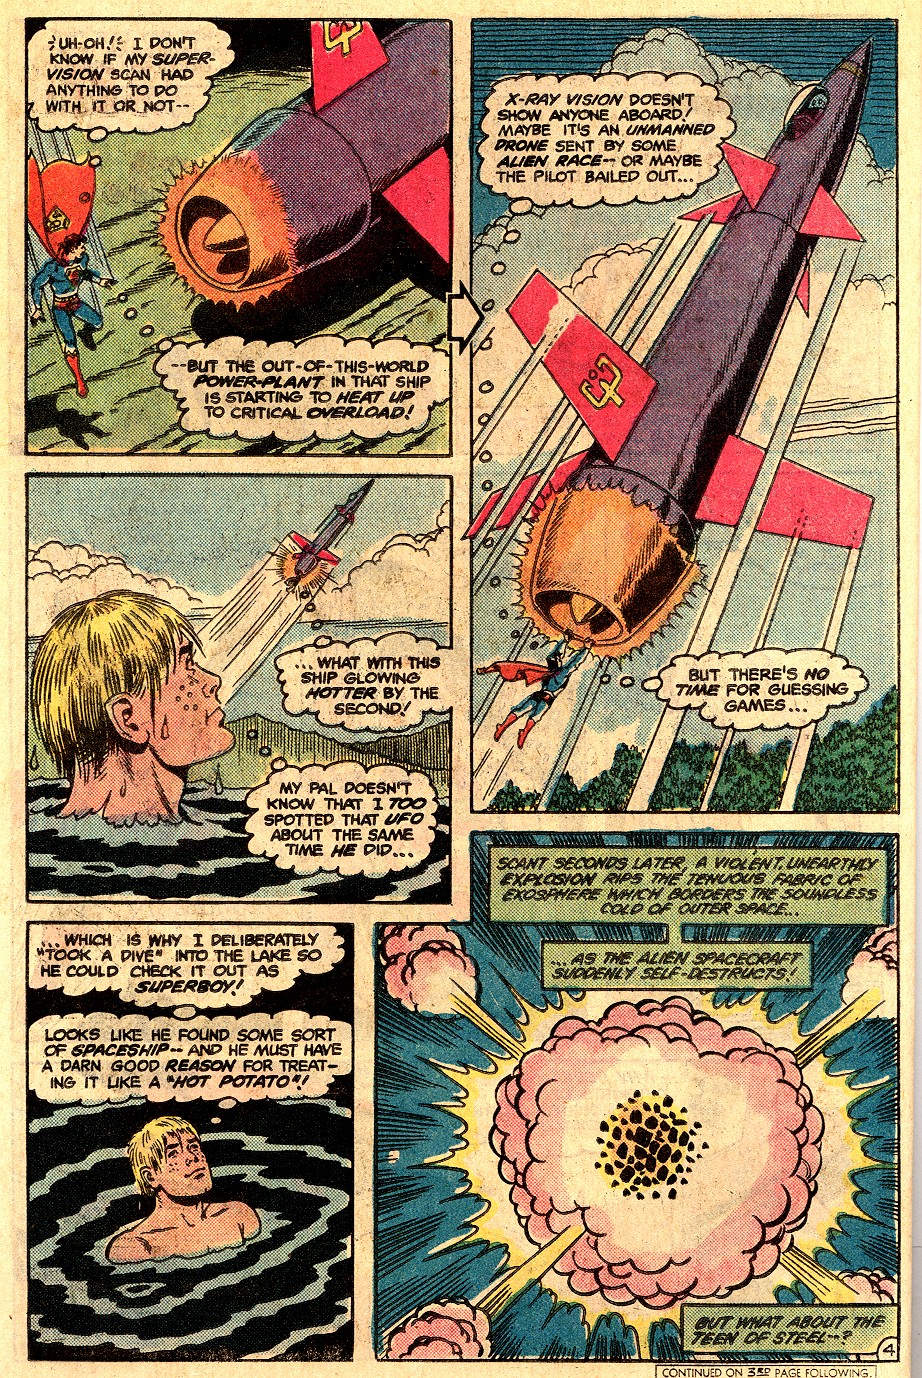 The New Adventures of Superboy 32 Page 5